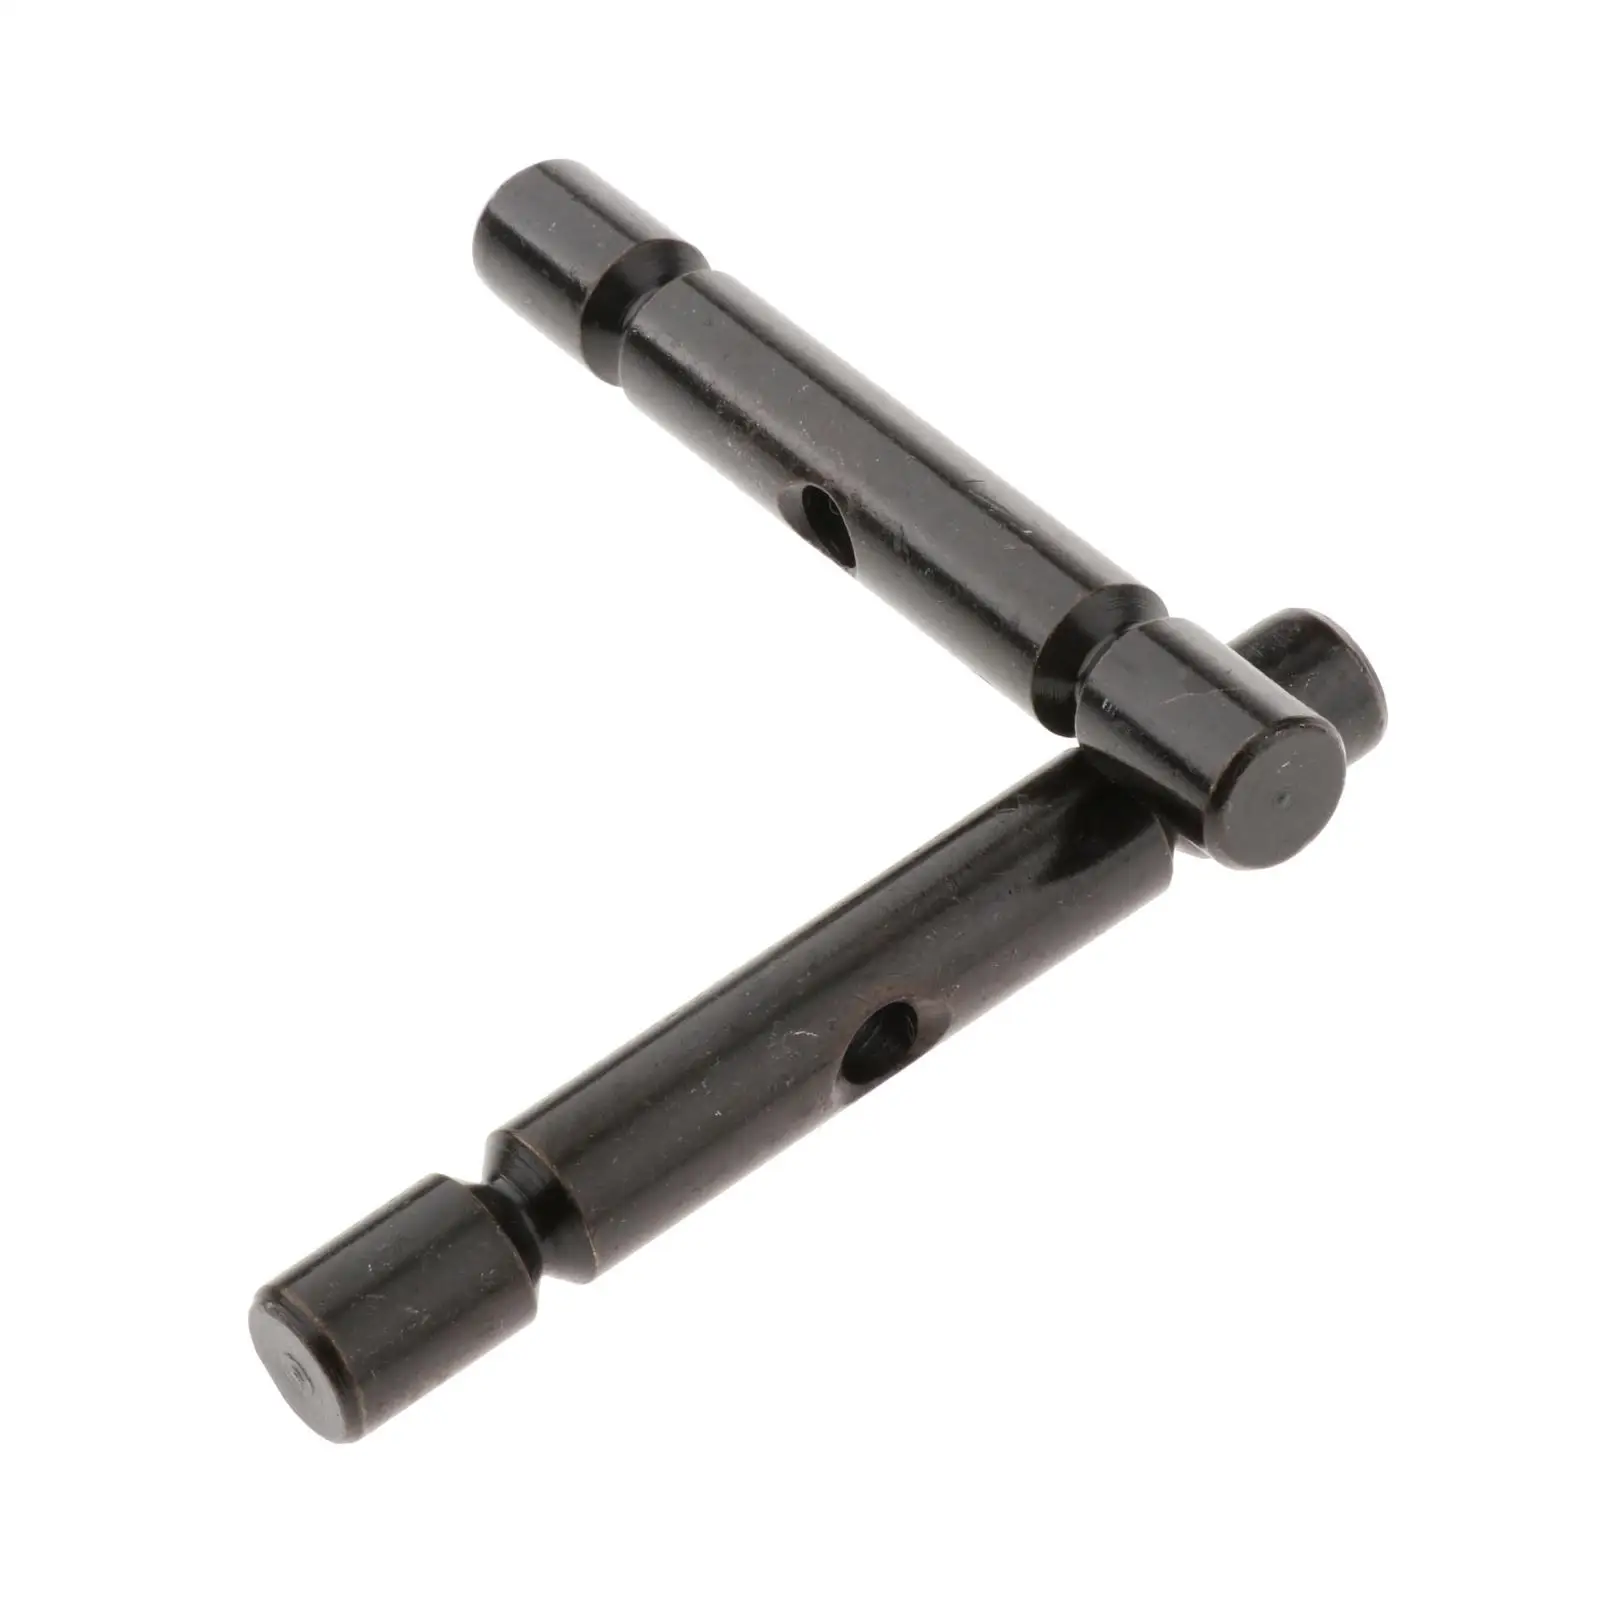 2 Pieces Black Steel Shear Pin 2205063 for Sportsman ATV Durable